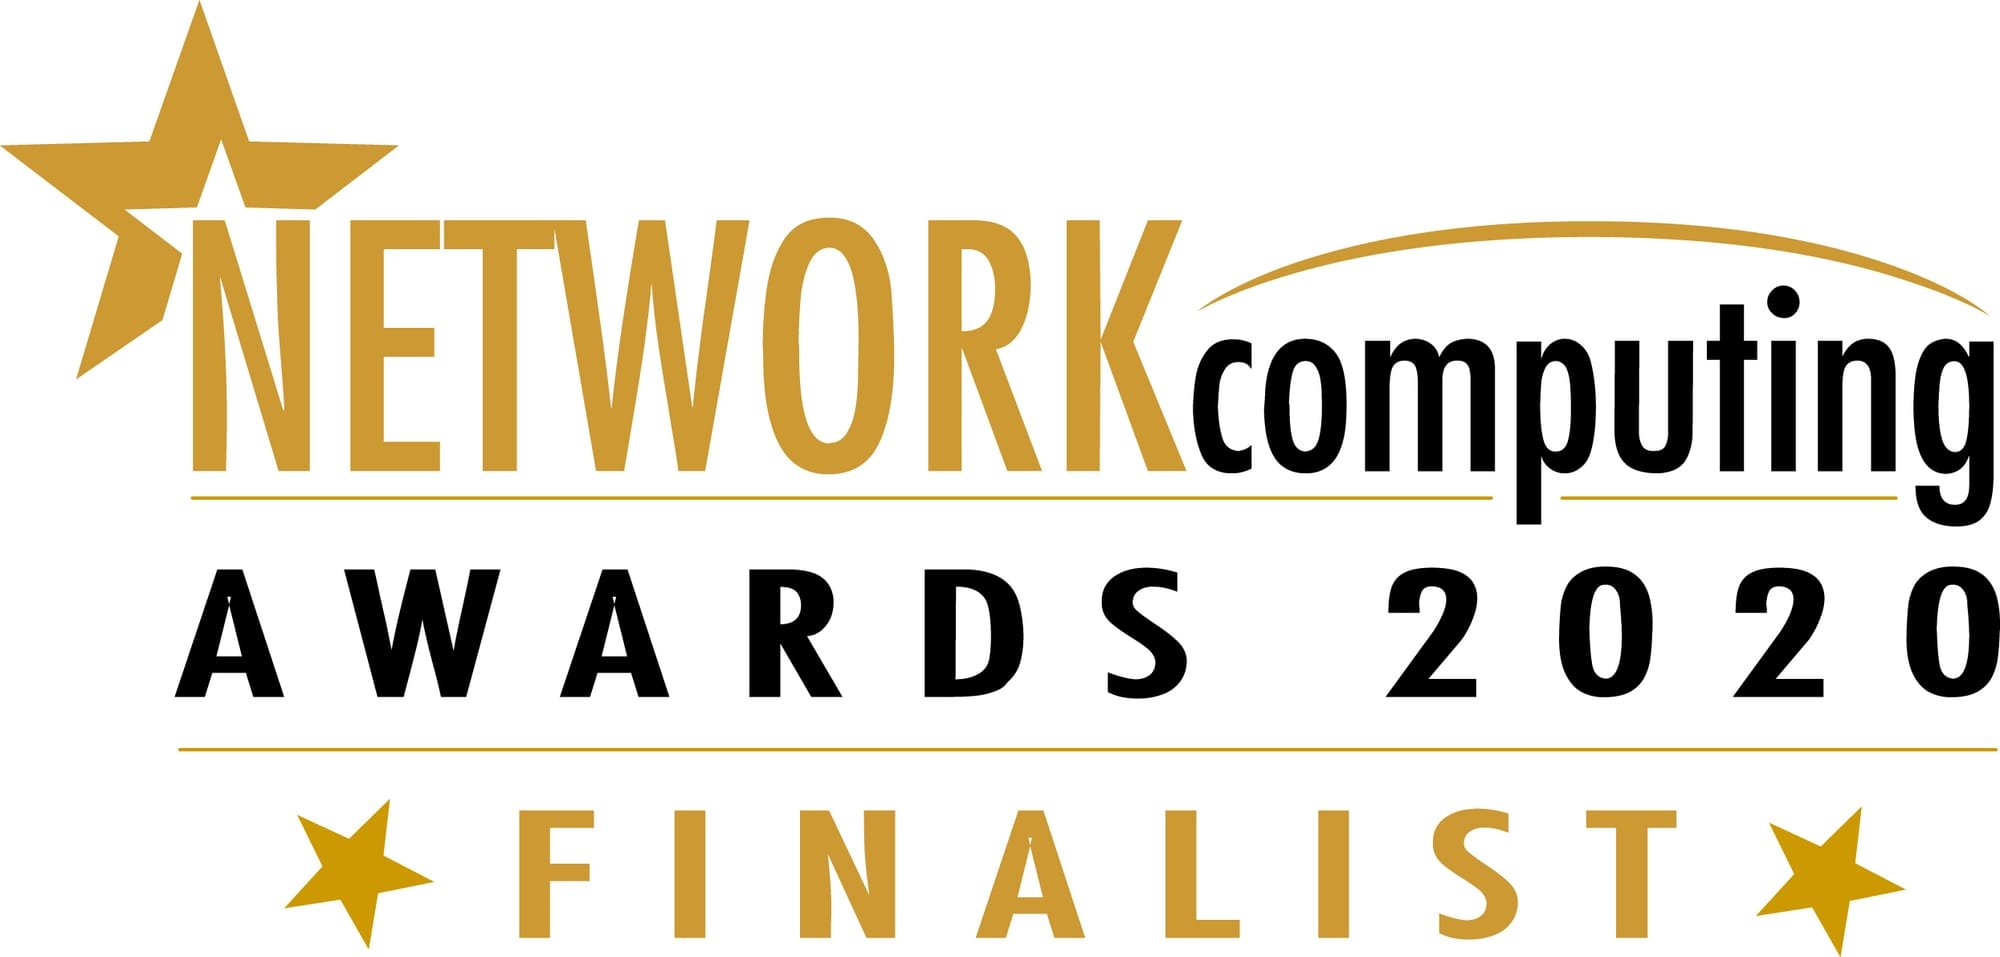 RtBrick named finalist in Network Computing Awards 2020